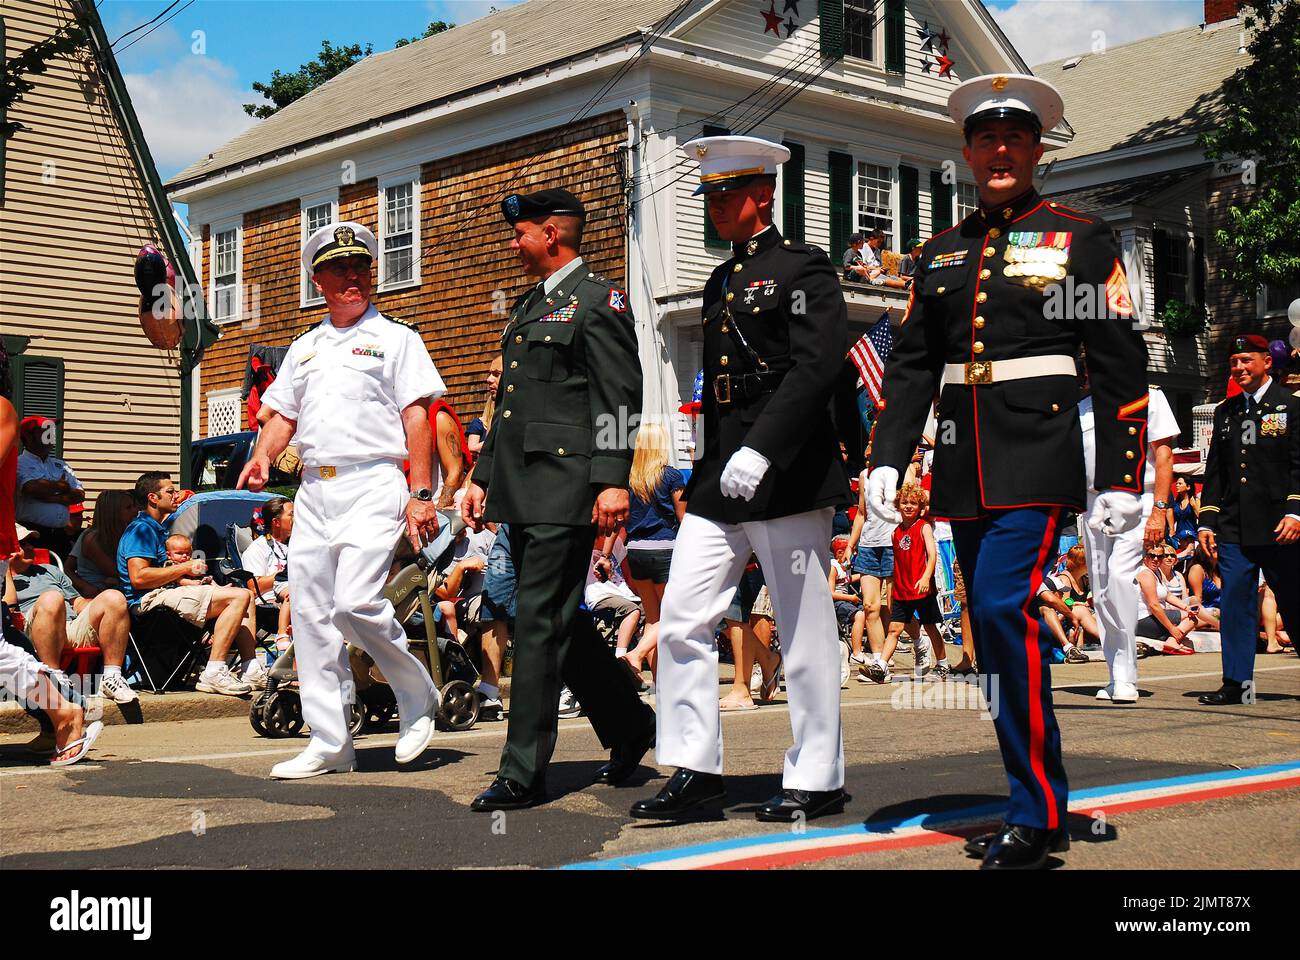 Representing all four major branches of the military, marchers participate in the oldest Fourth of July parade un the USA in Bristol Rhode Island Stock Photo